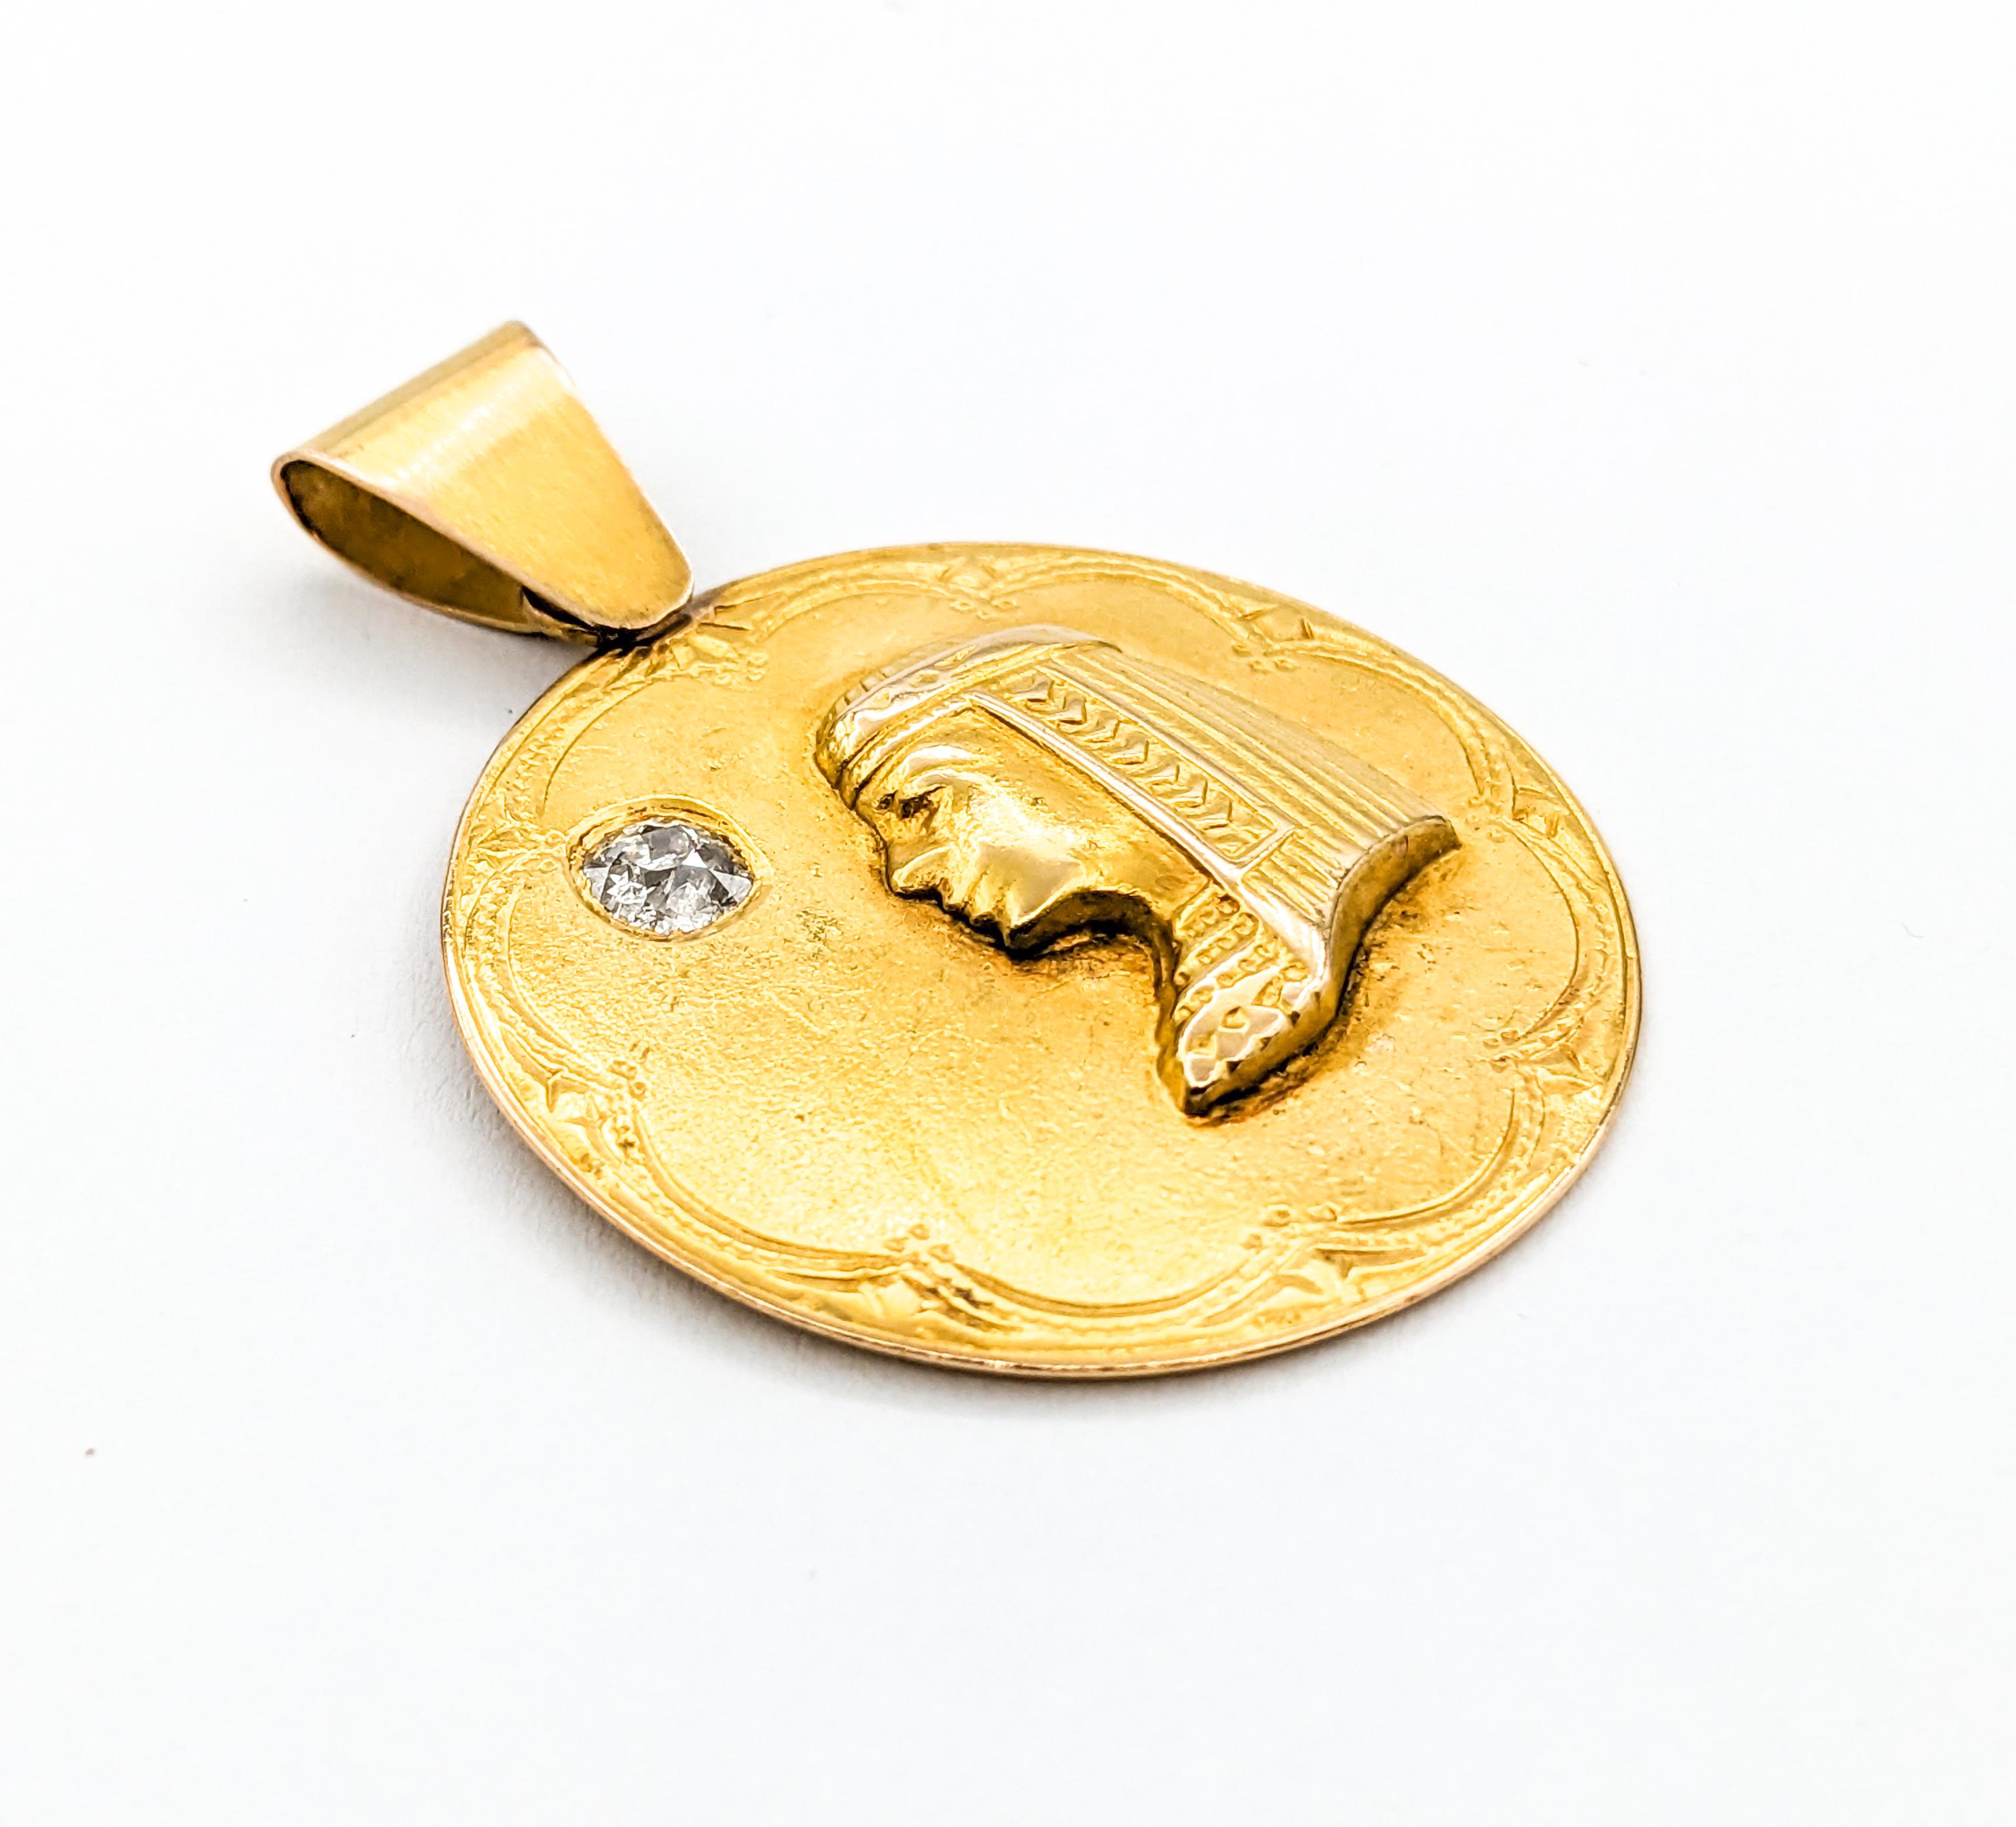 Antique Egyptian Revival Pharaoh Diamond Medallion Pendant In Yellow Gold

Introducing this exquisite Antique Egypt Revival Medallion Pendant in rich 18K gold. This stunning piece features  a captivating .30 carat Mine Cut diamond with old world